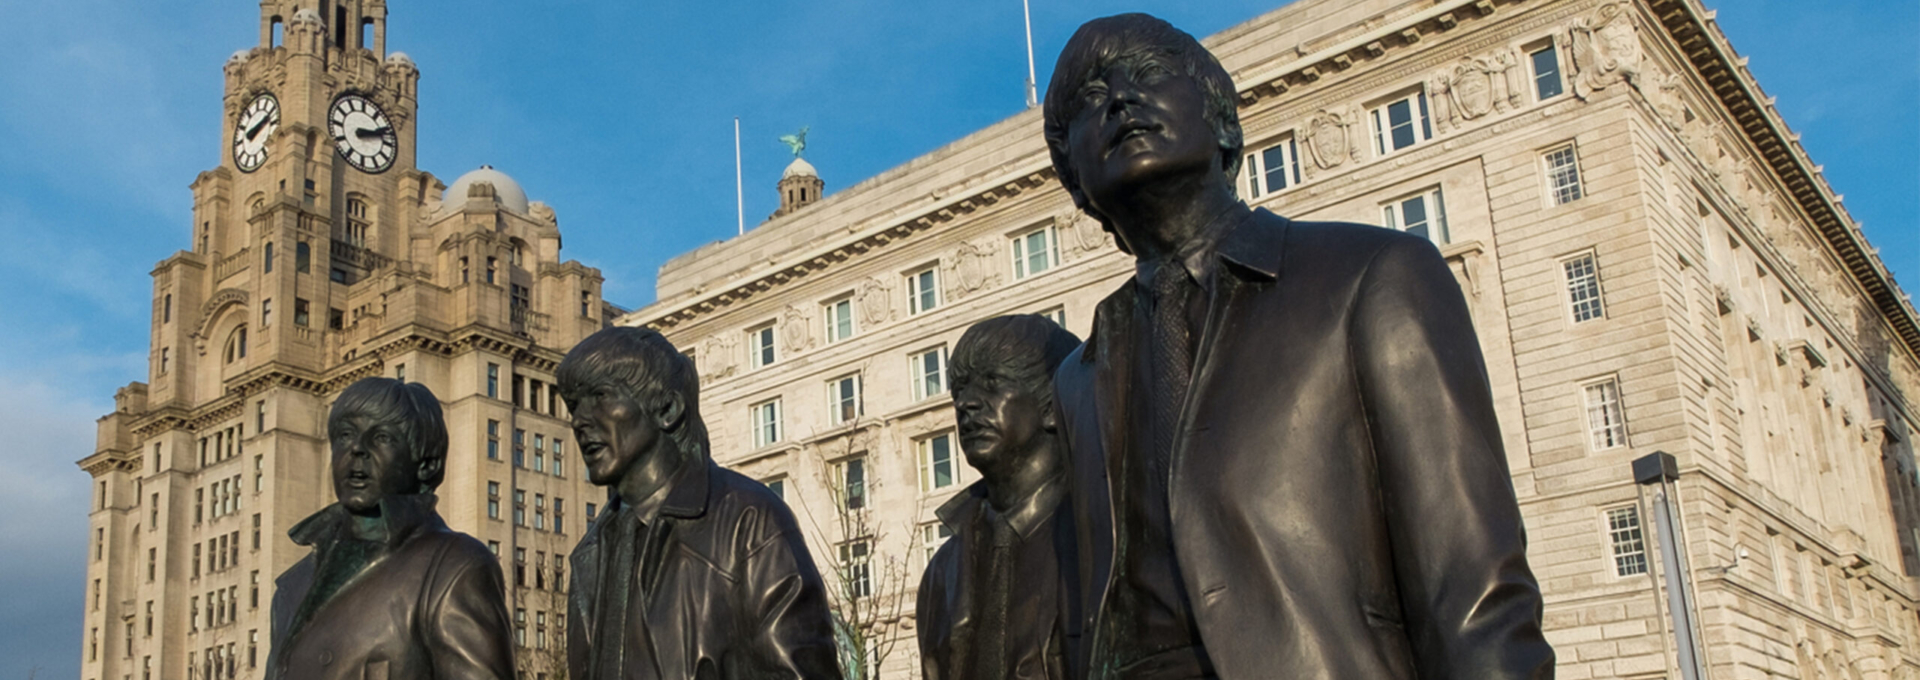 The Beatles Statues at the waterfront in front of the Liver Buildings in Liverpool